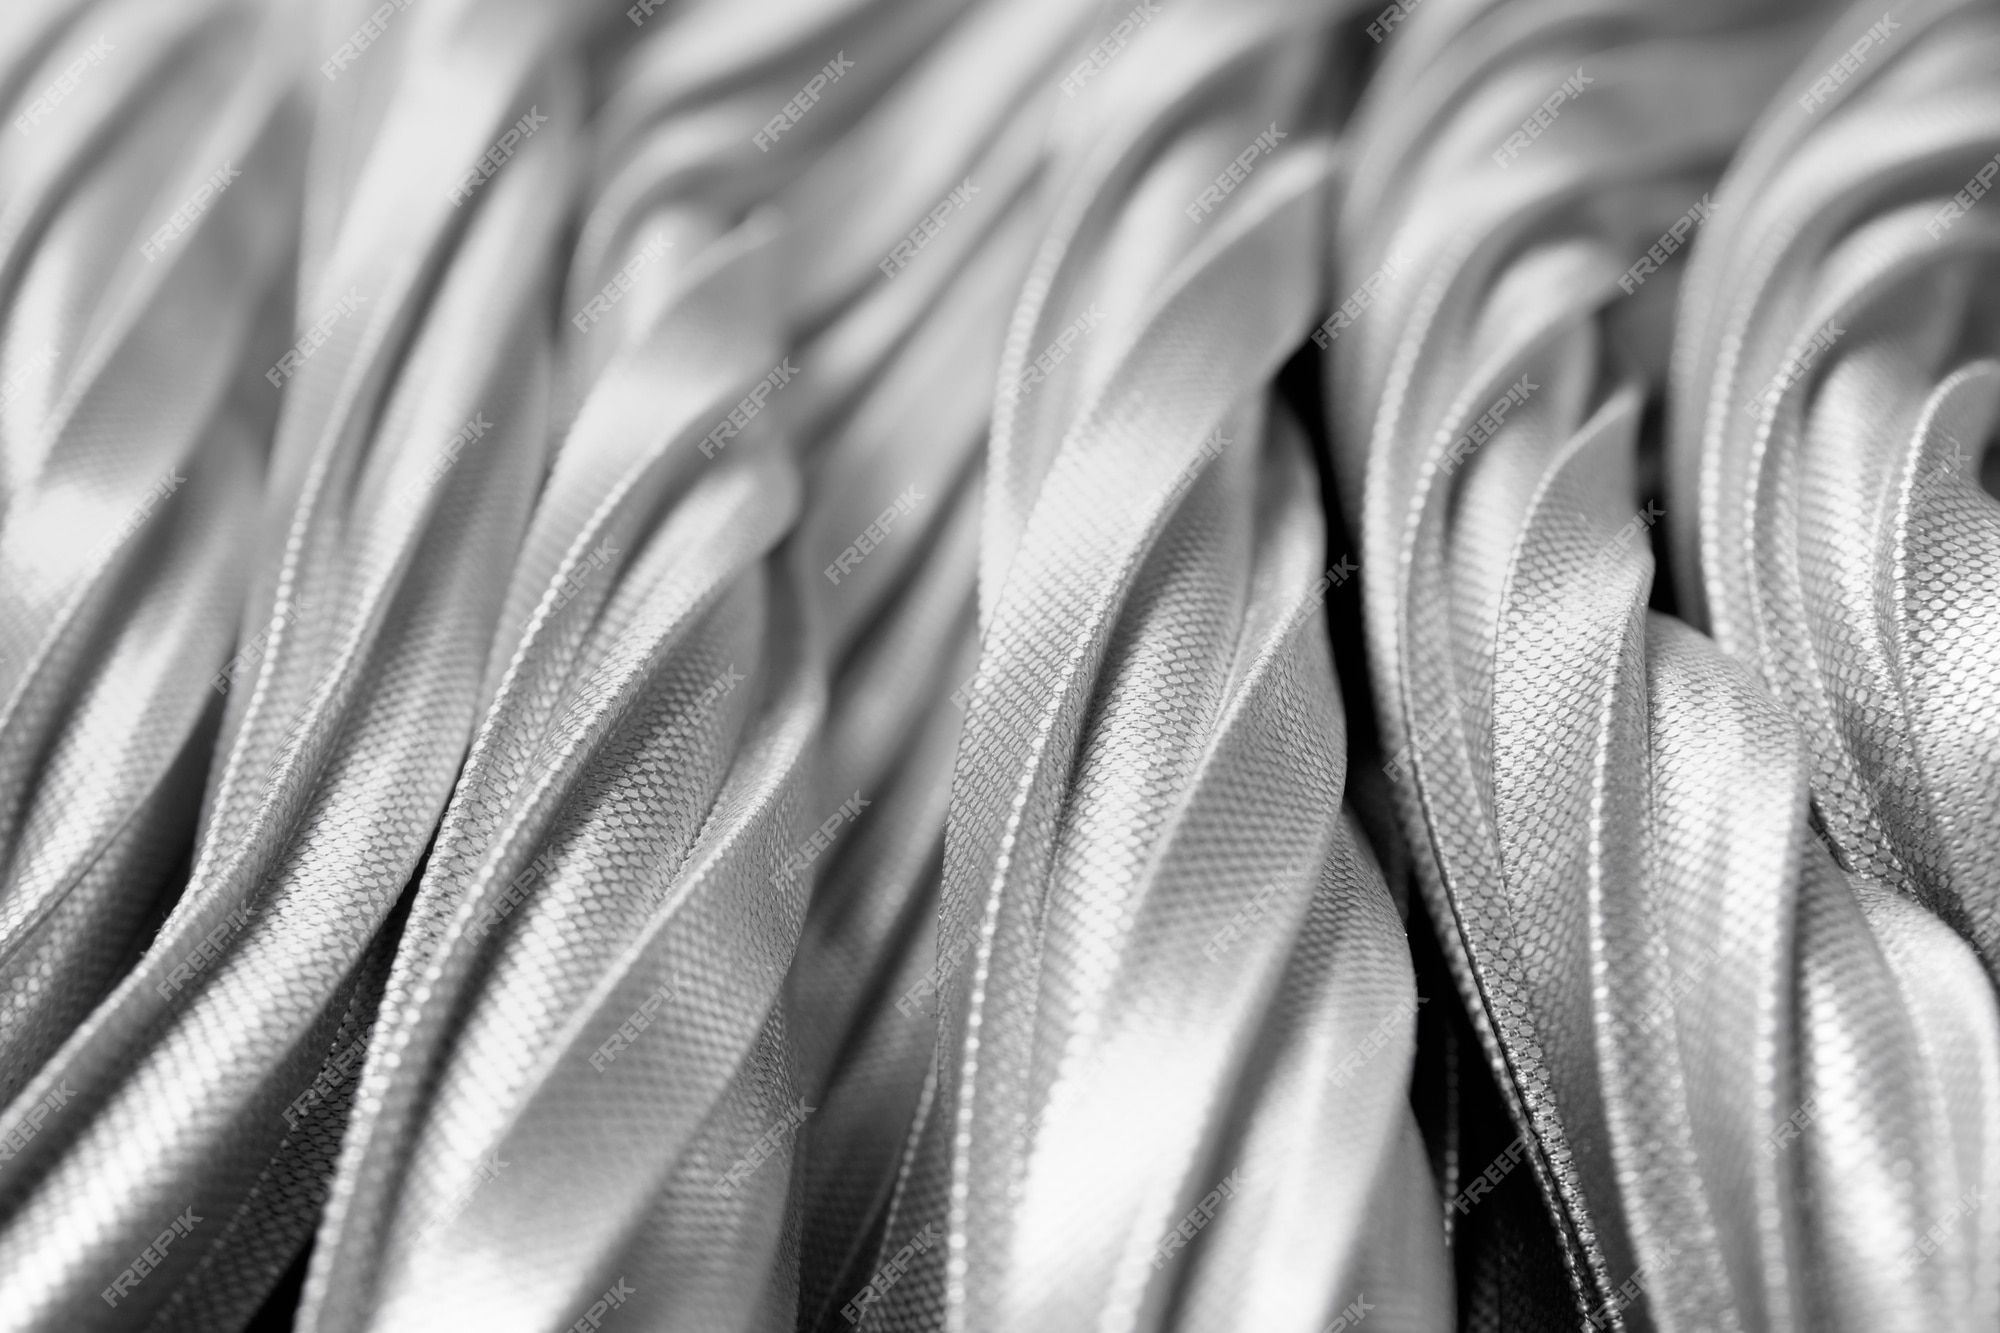 A close up of a silver metal fabric background - Macro